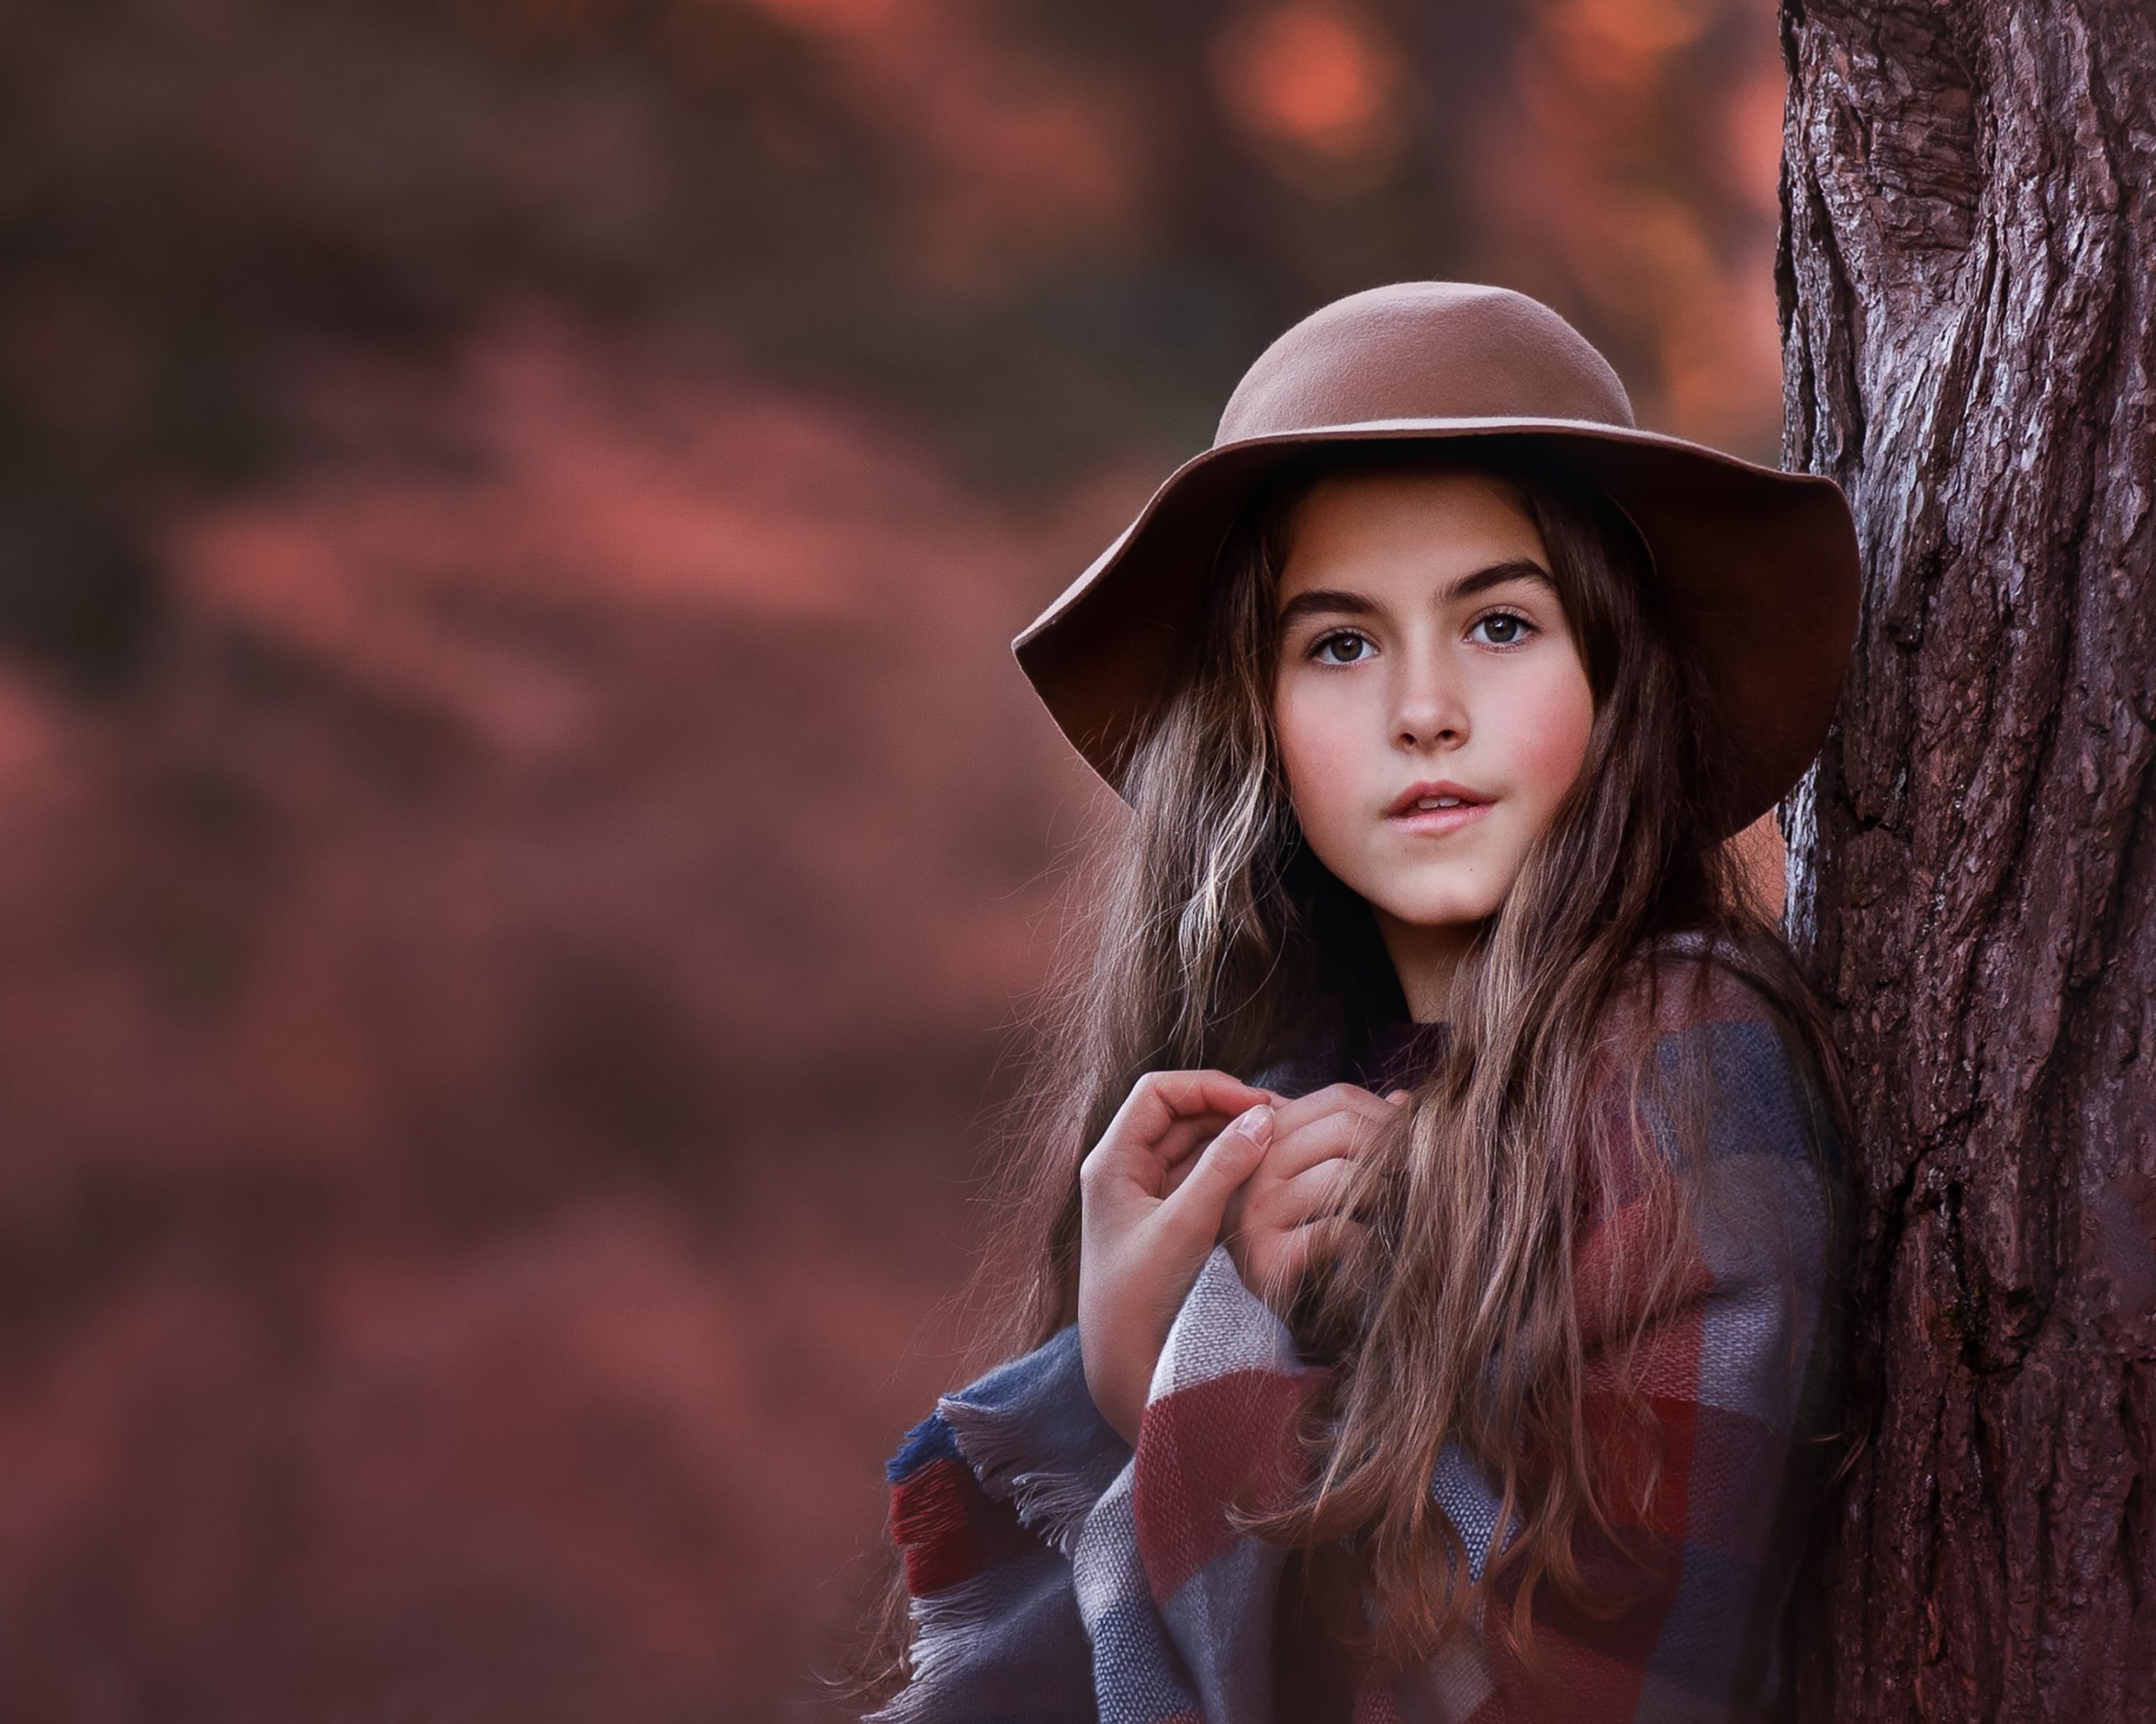 Young girl in hat leaning against a tree in autumn